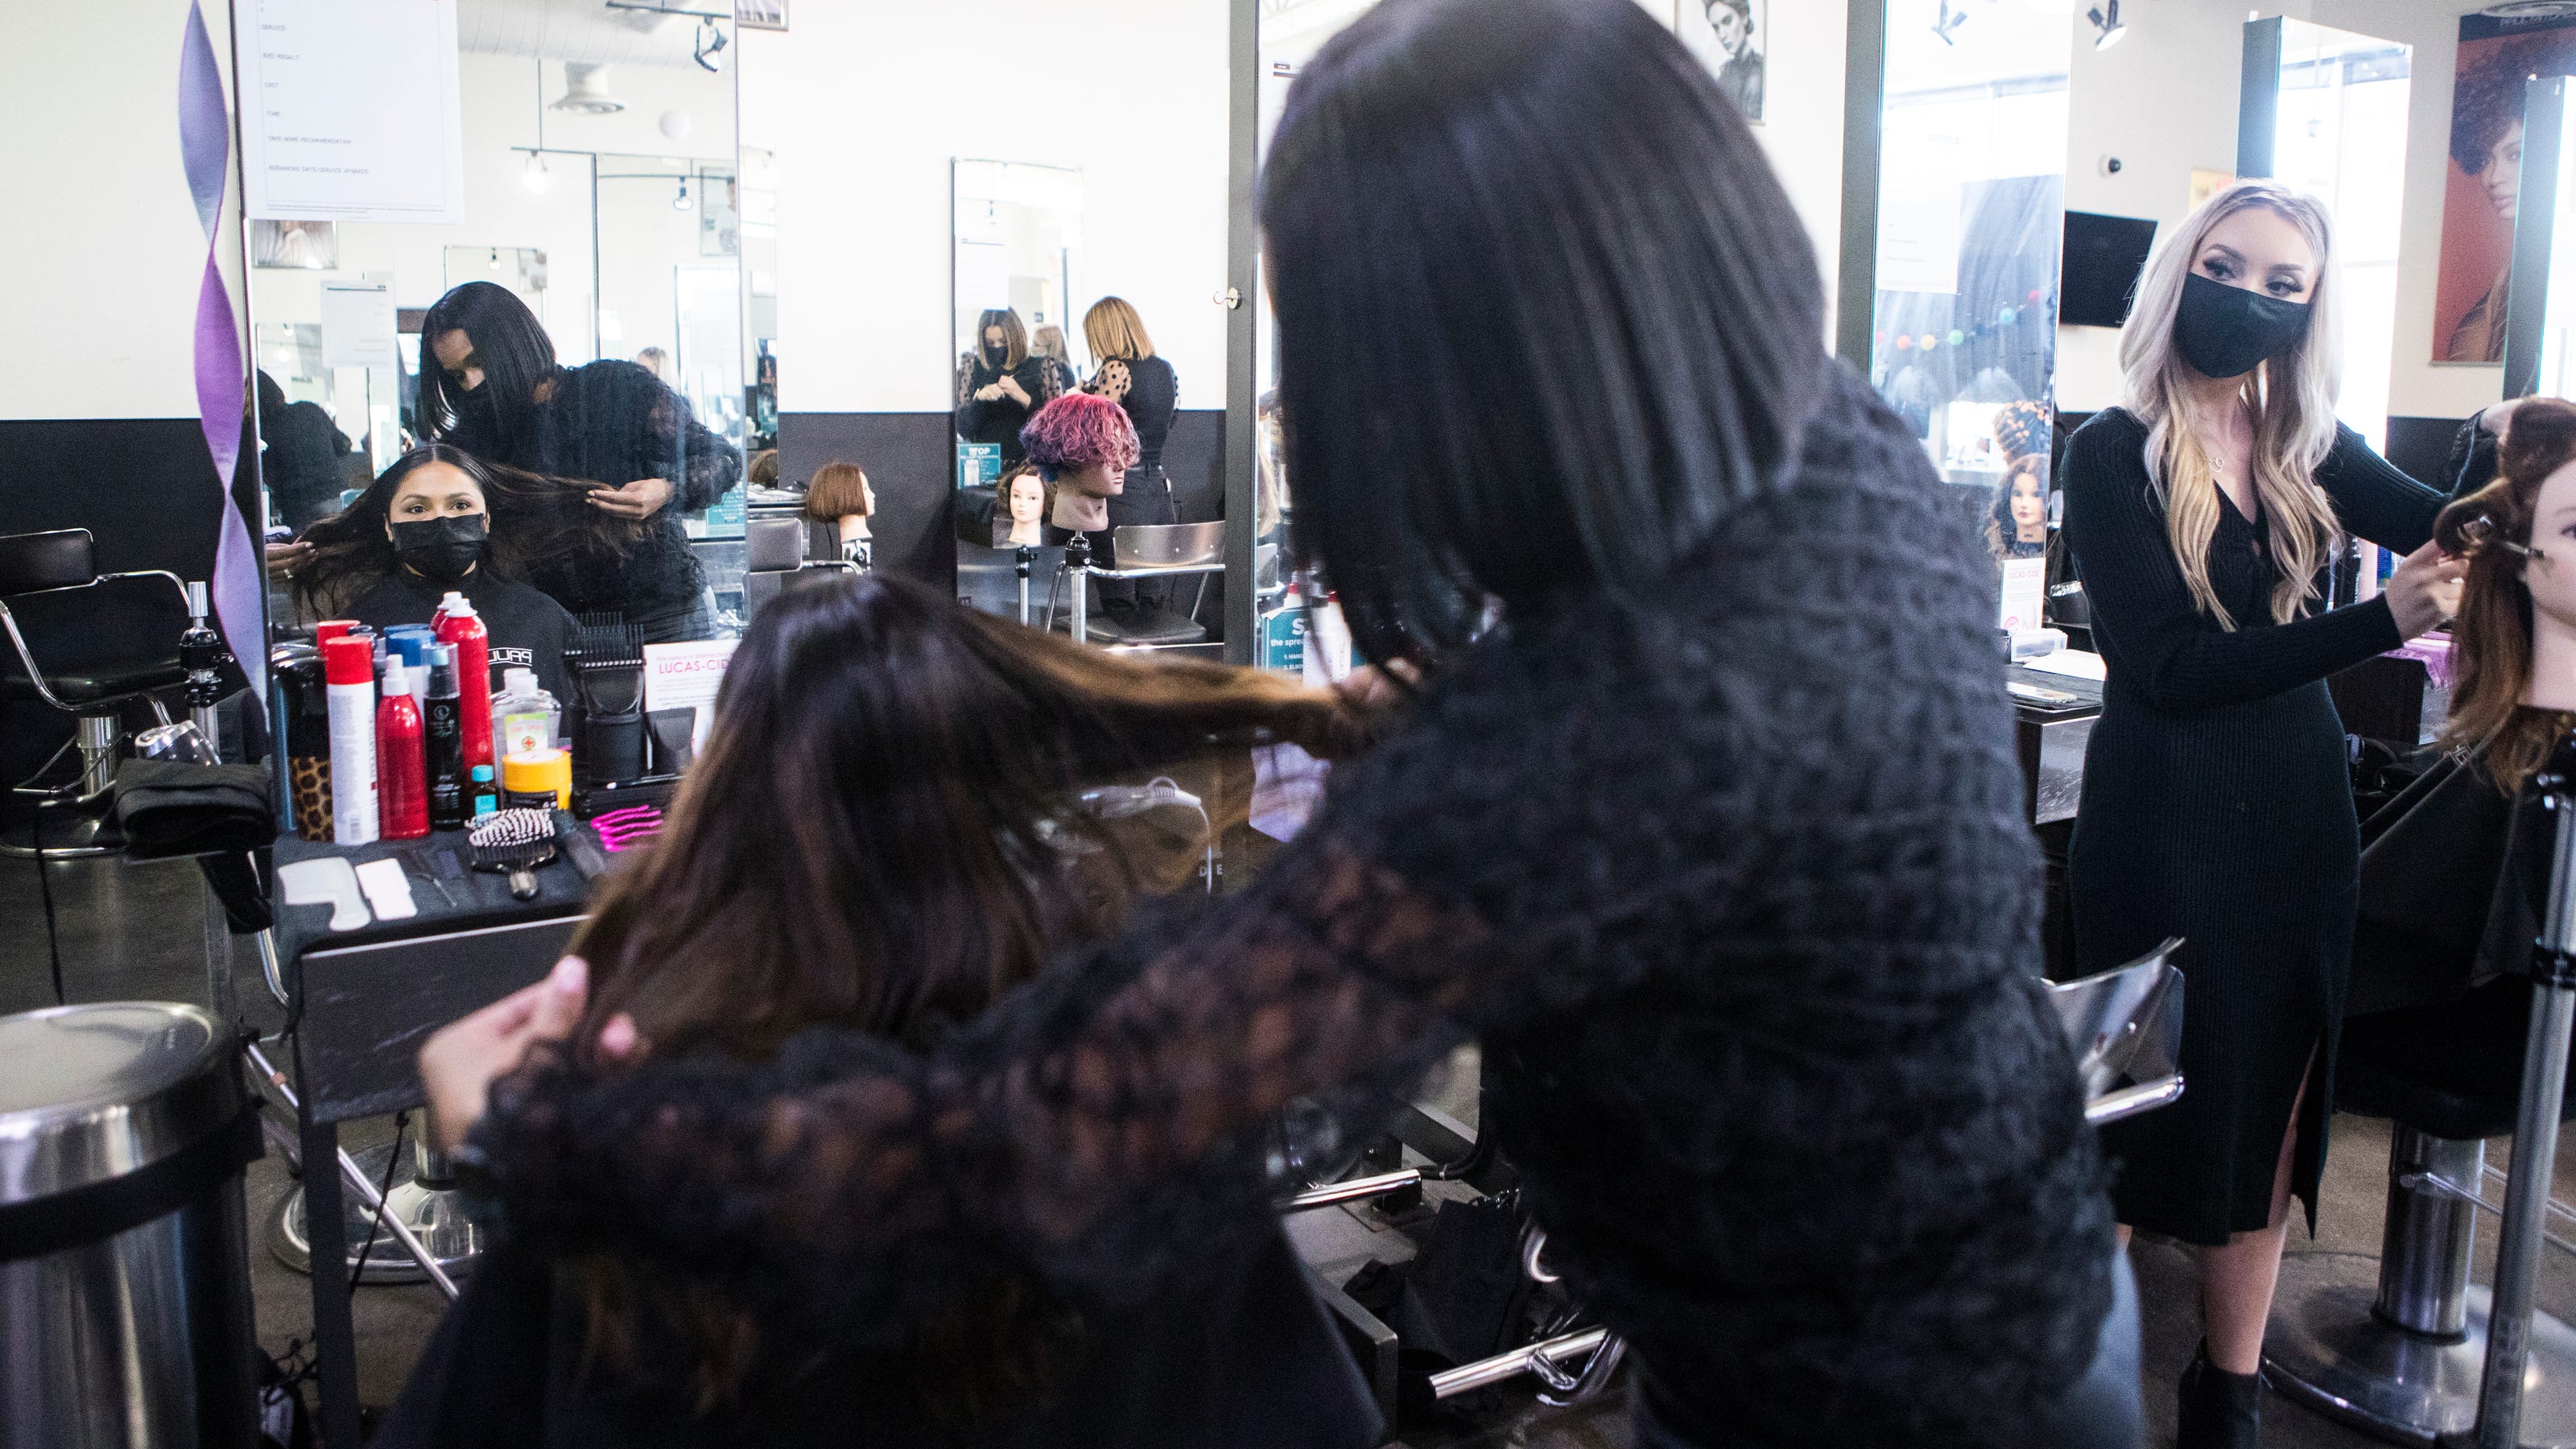 Staffing shortages and supply issues impacting local hair salons